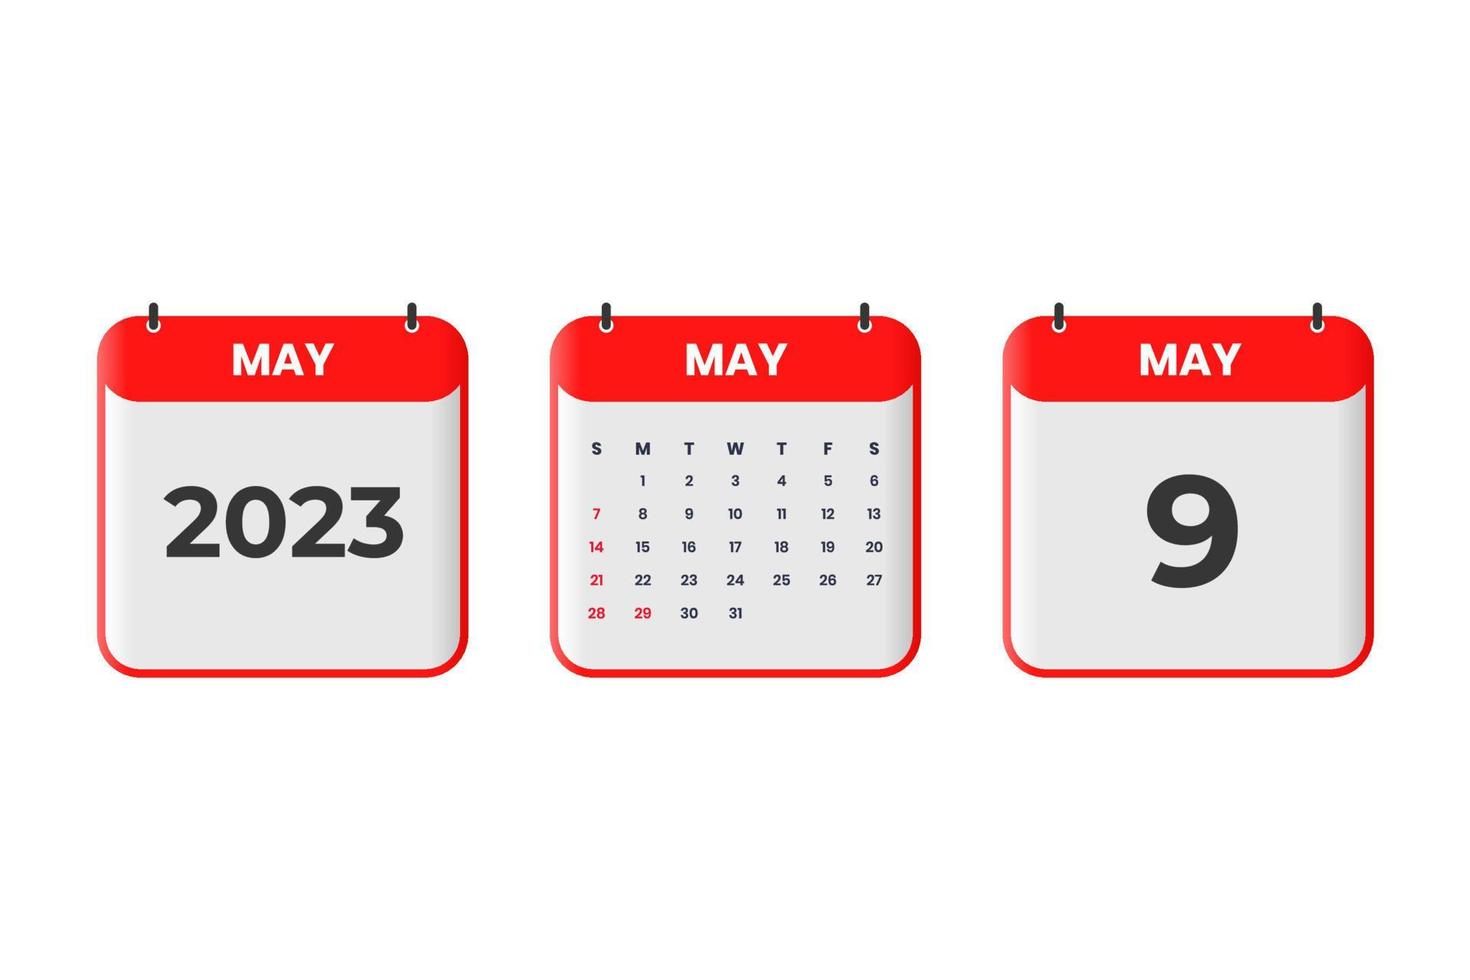 May 2023 calendar design. 9th May 2023 calendar icon for schedule, appointment, important date concept vector